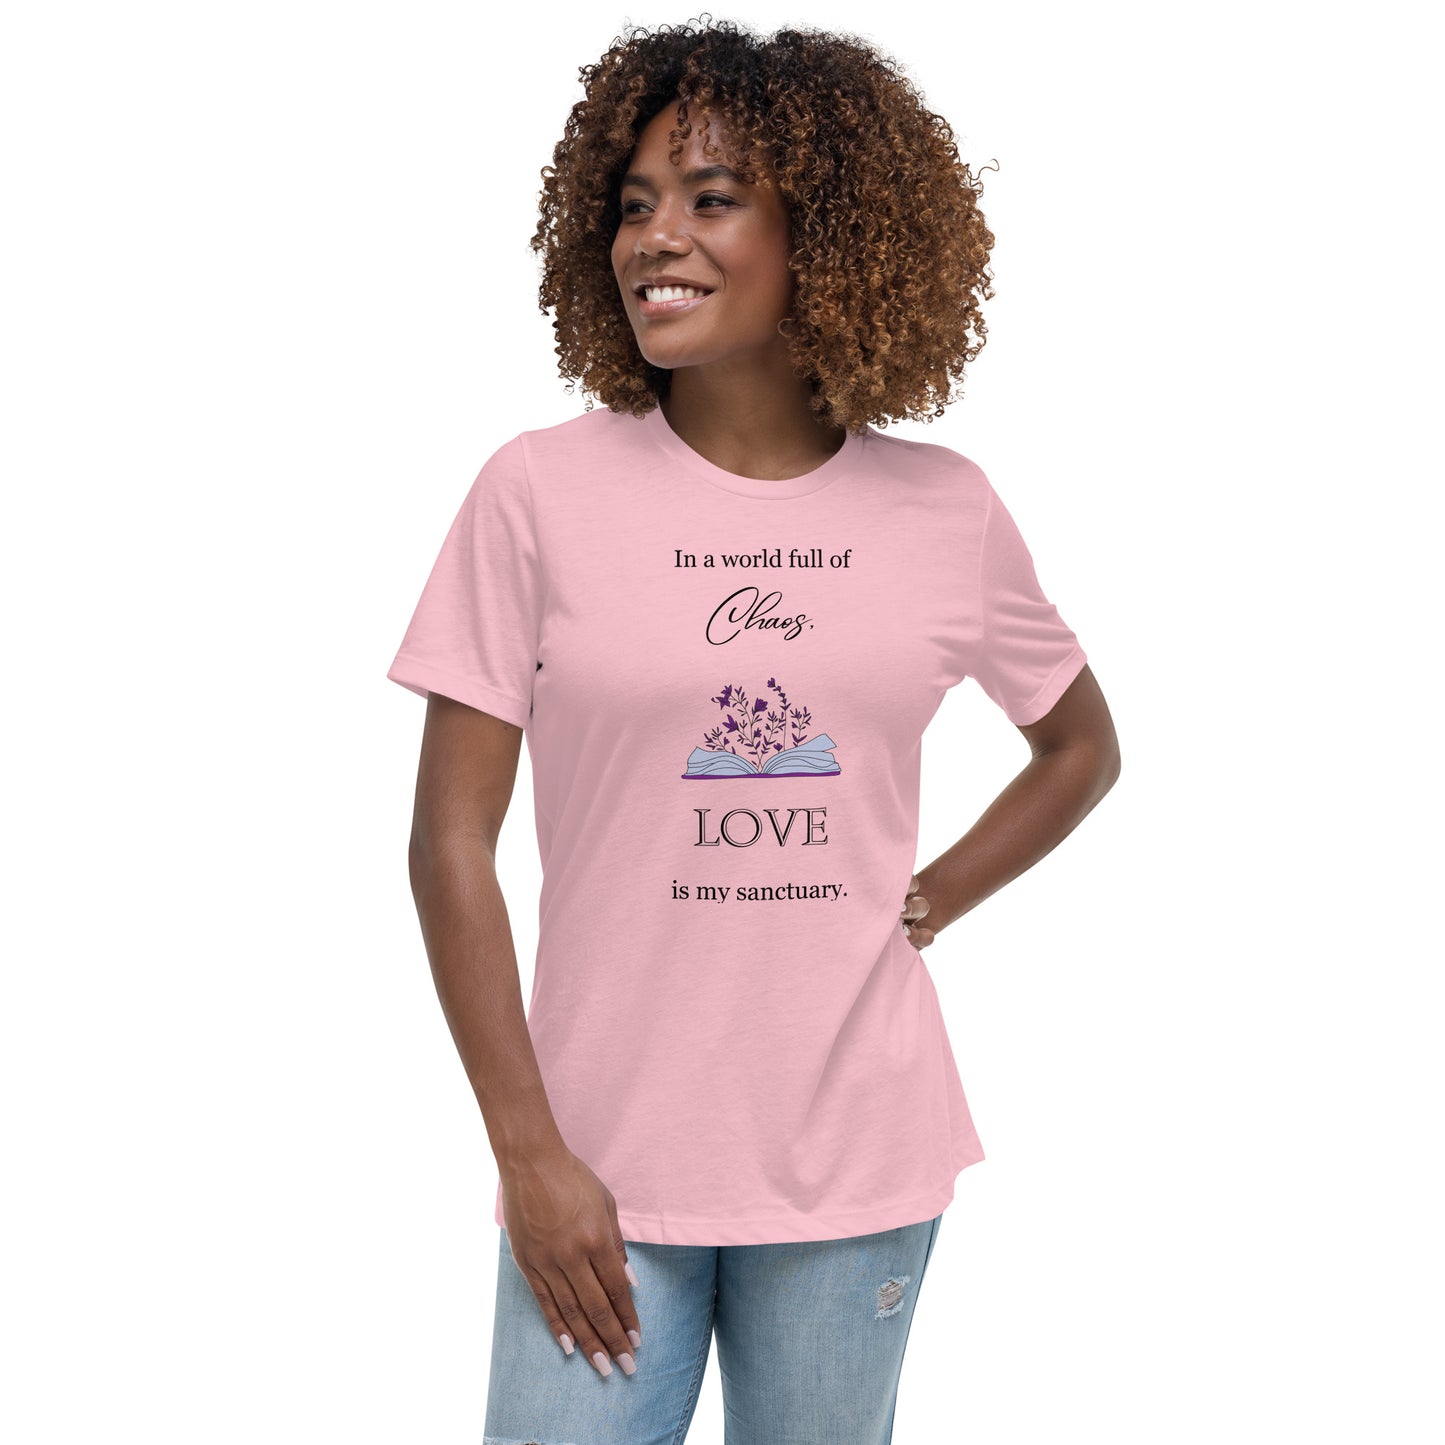 Women's Relaxed T-Shirt, in a world full of chaos, love is my sanctuary